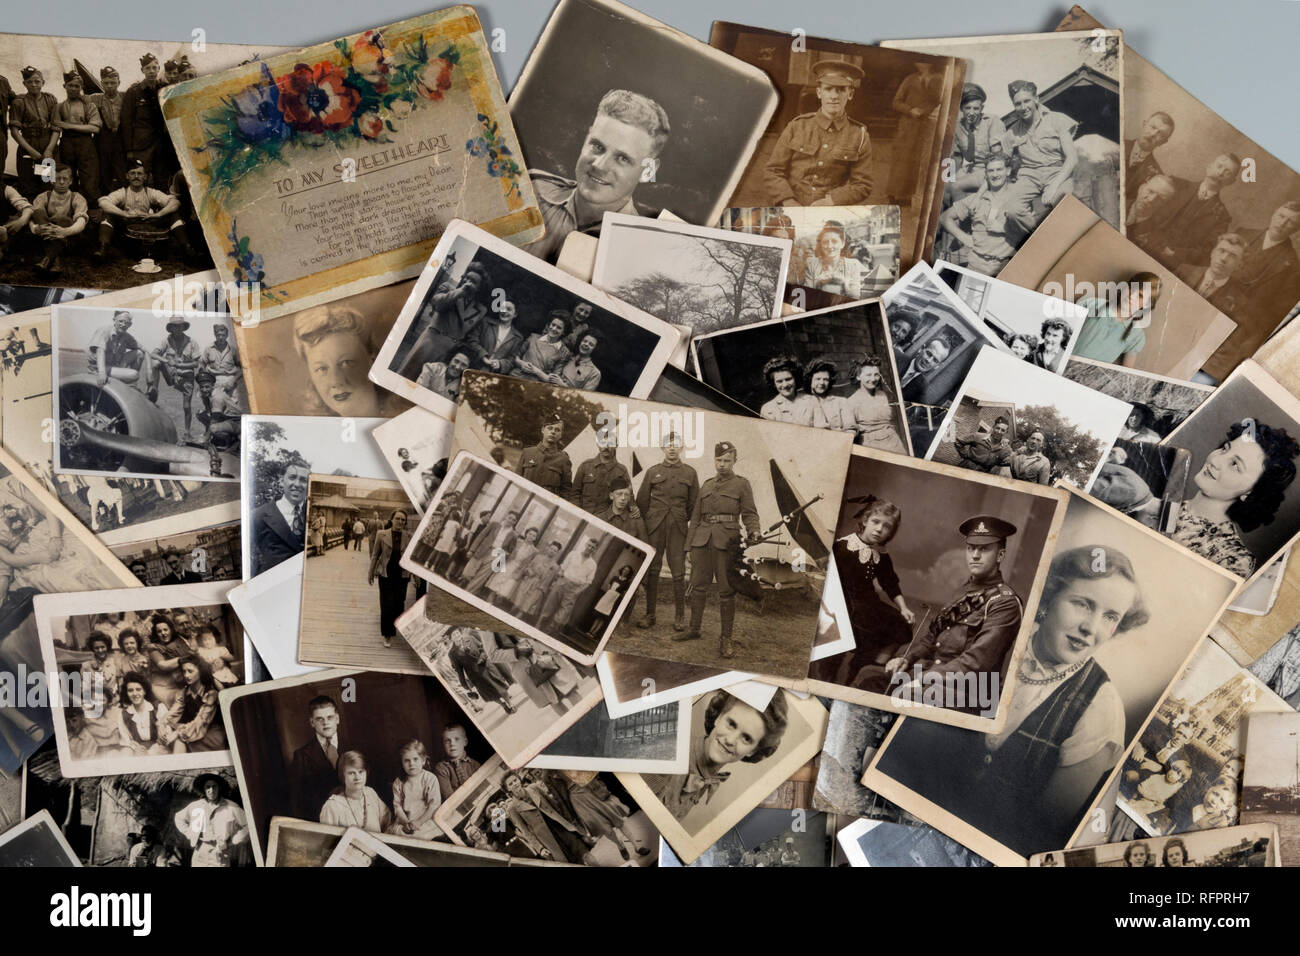 Genealogy - Family History - Old family photographs dating from around 1890 up to about 1950. Stock Photo